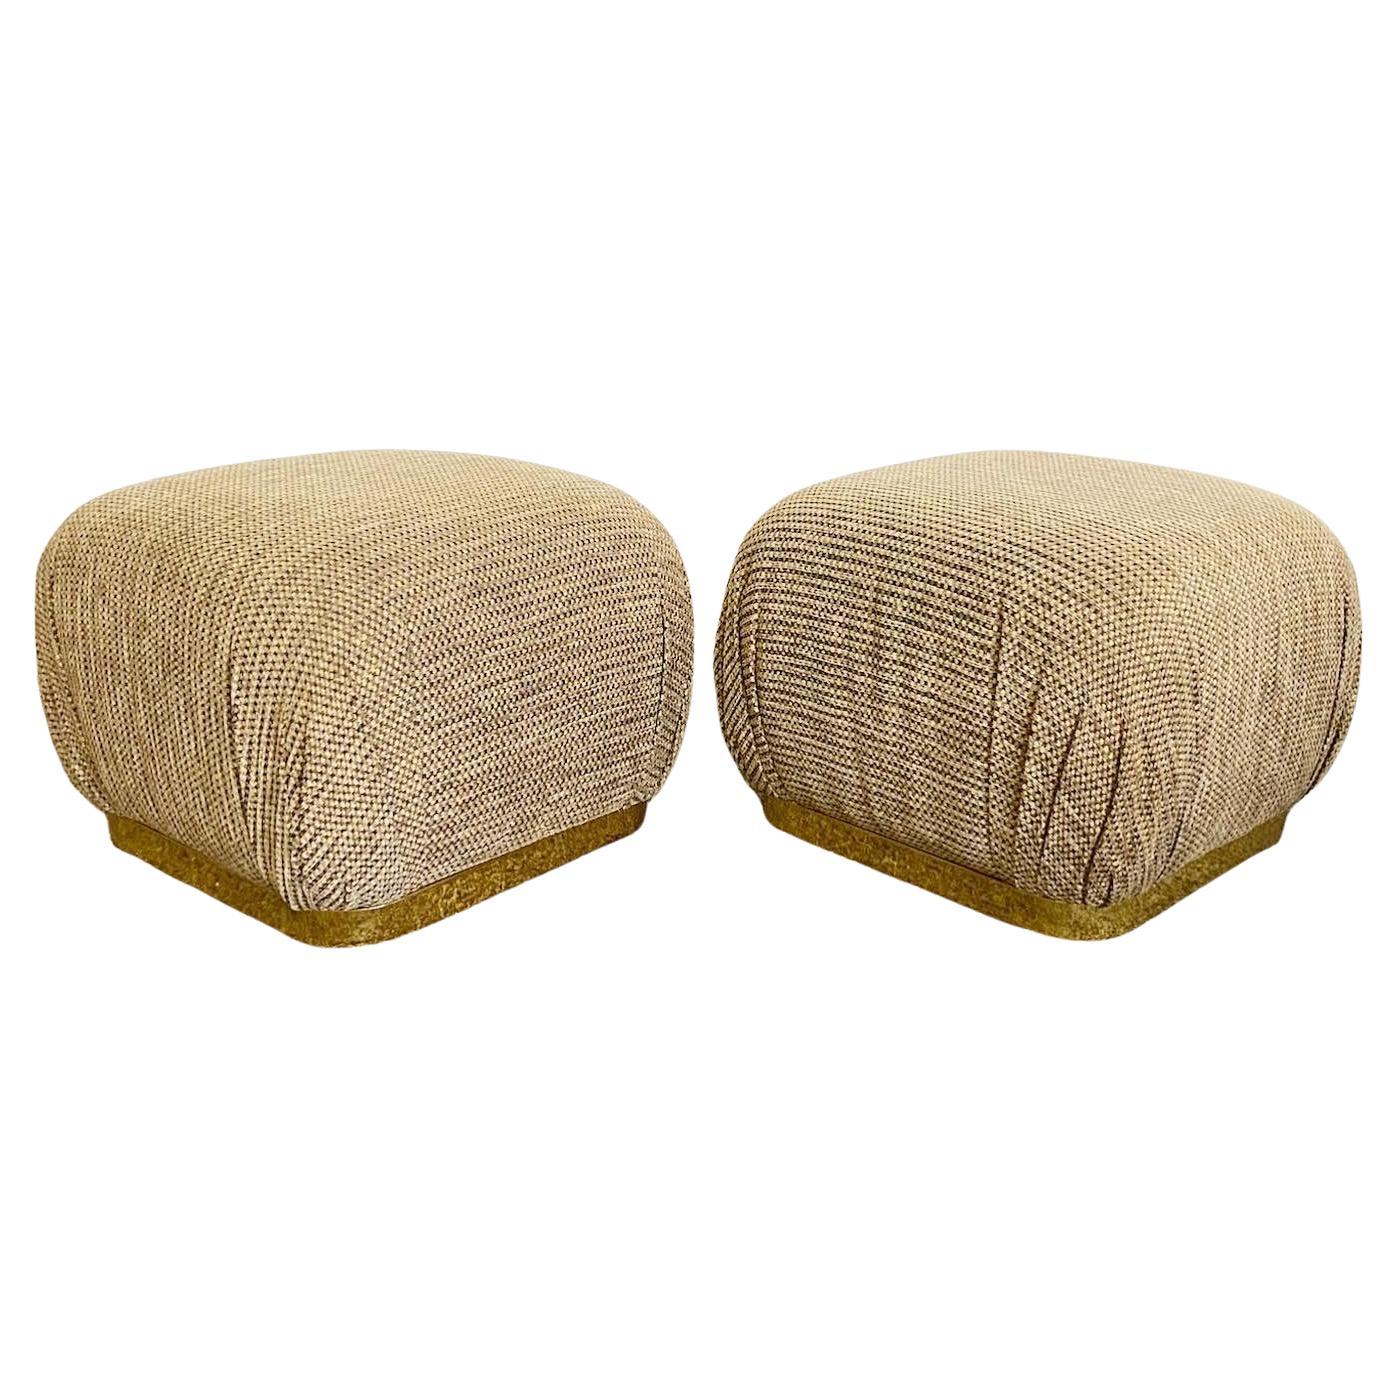 Enhance your interior design with the exquisite Textured Brown Pouf Ottomans, seamlessly combining sumptuous textured fabric with a lavish gold base, creating an aura of sophisticated postmodern elegance that will truly elevate your decor.

Textured